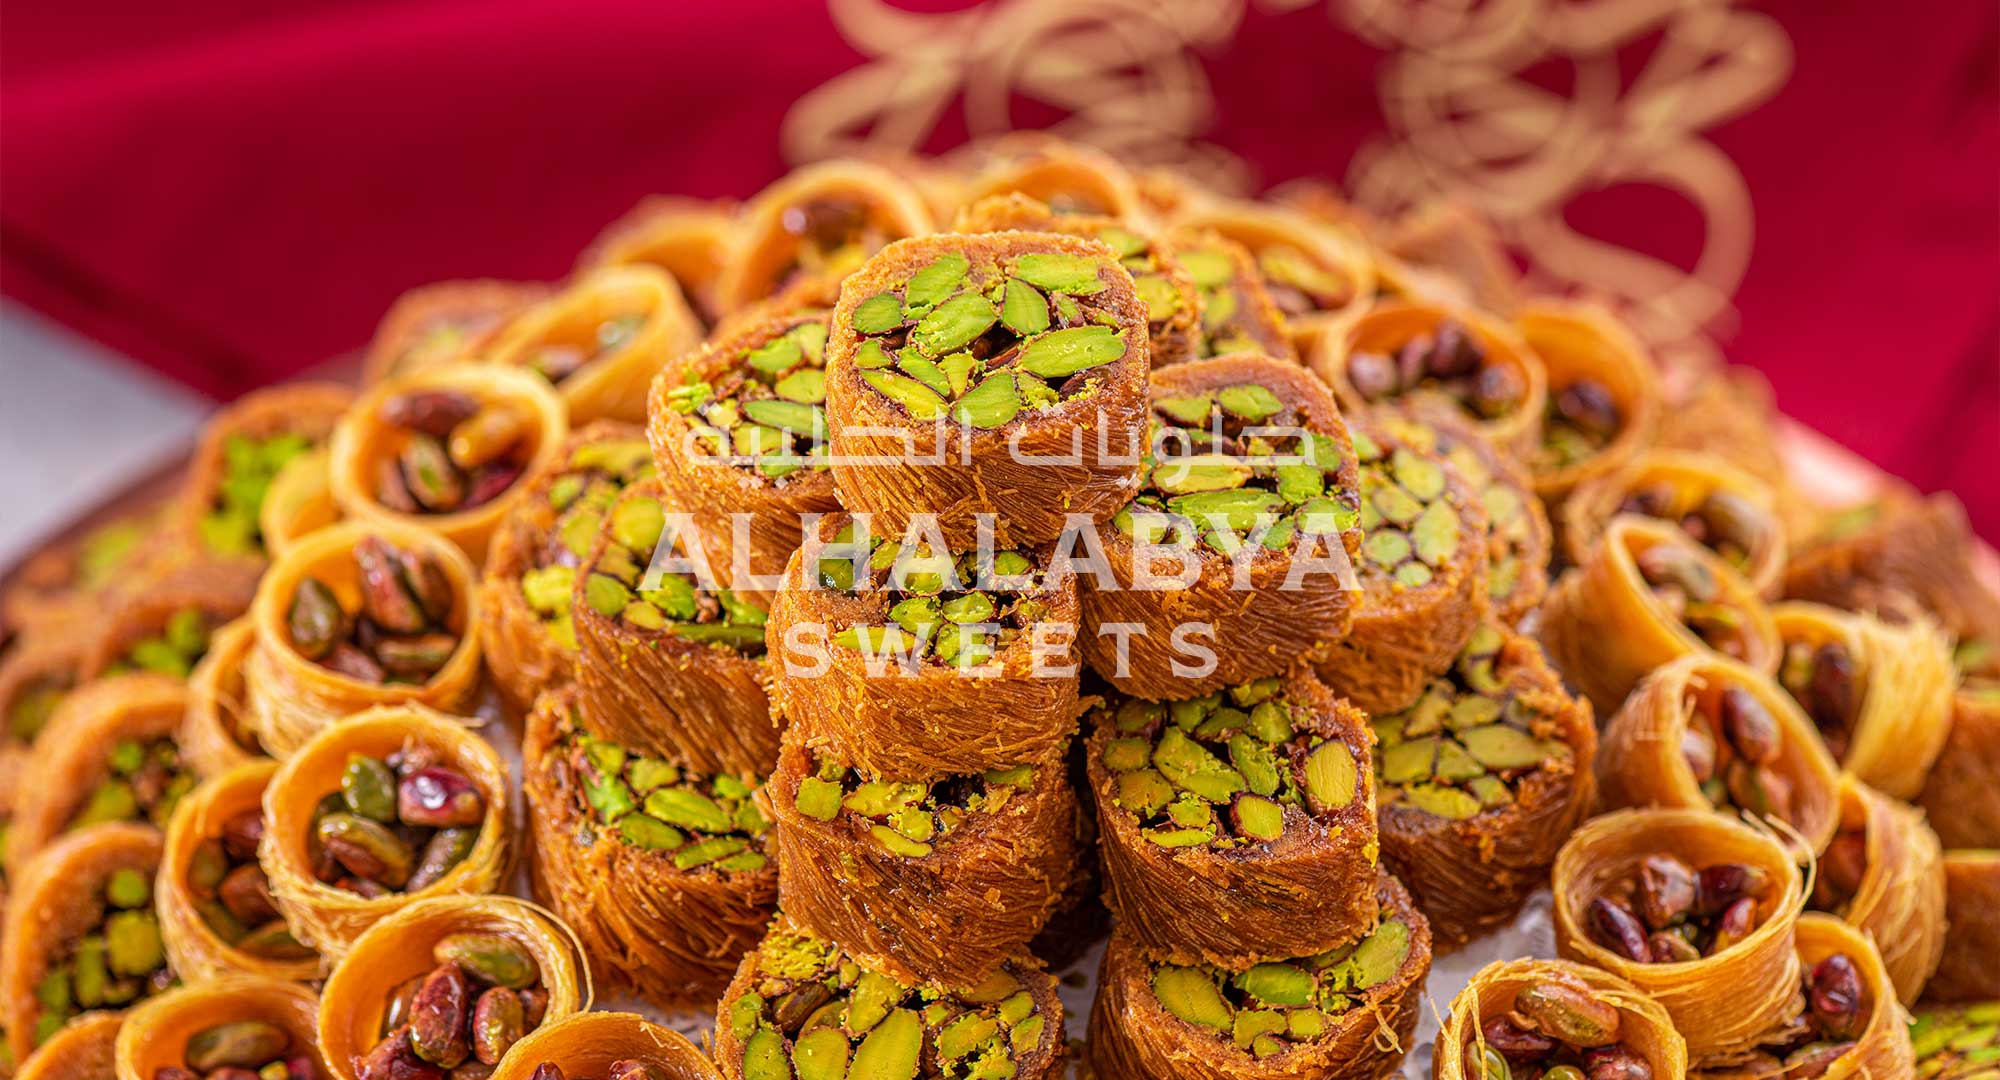 What Makes Our Baklava the Best in Dubai?